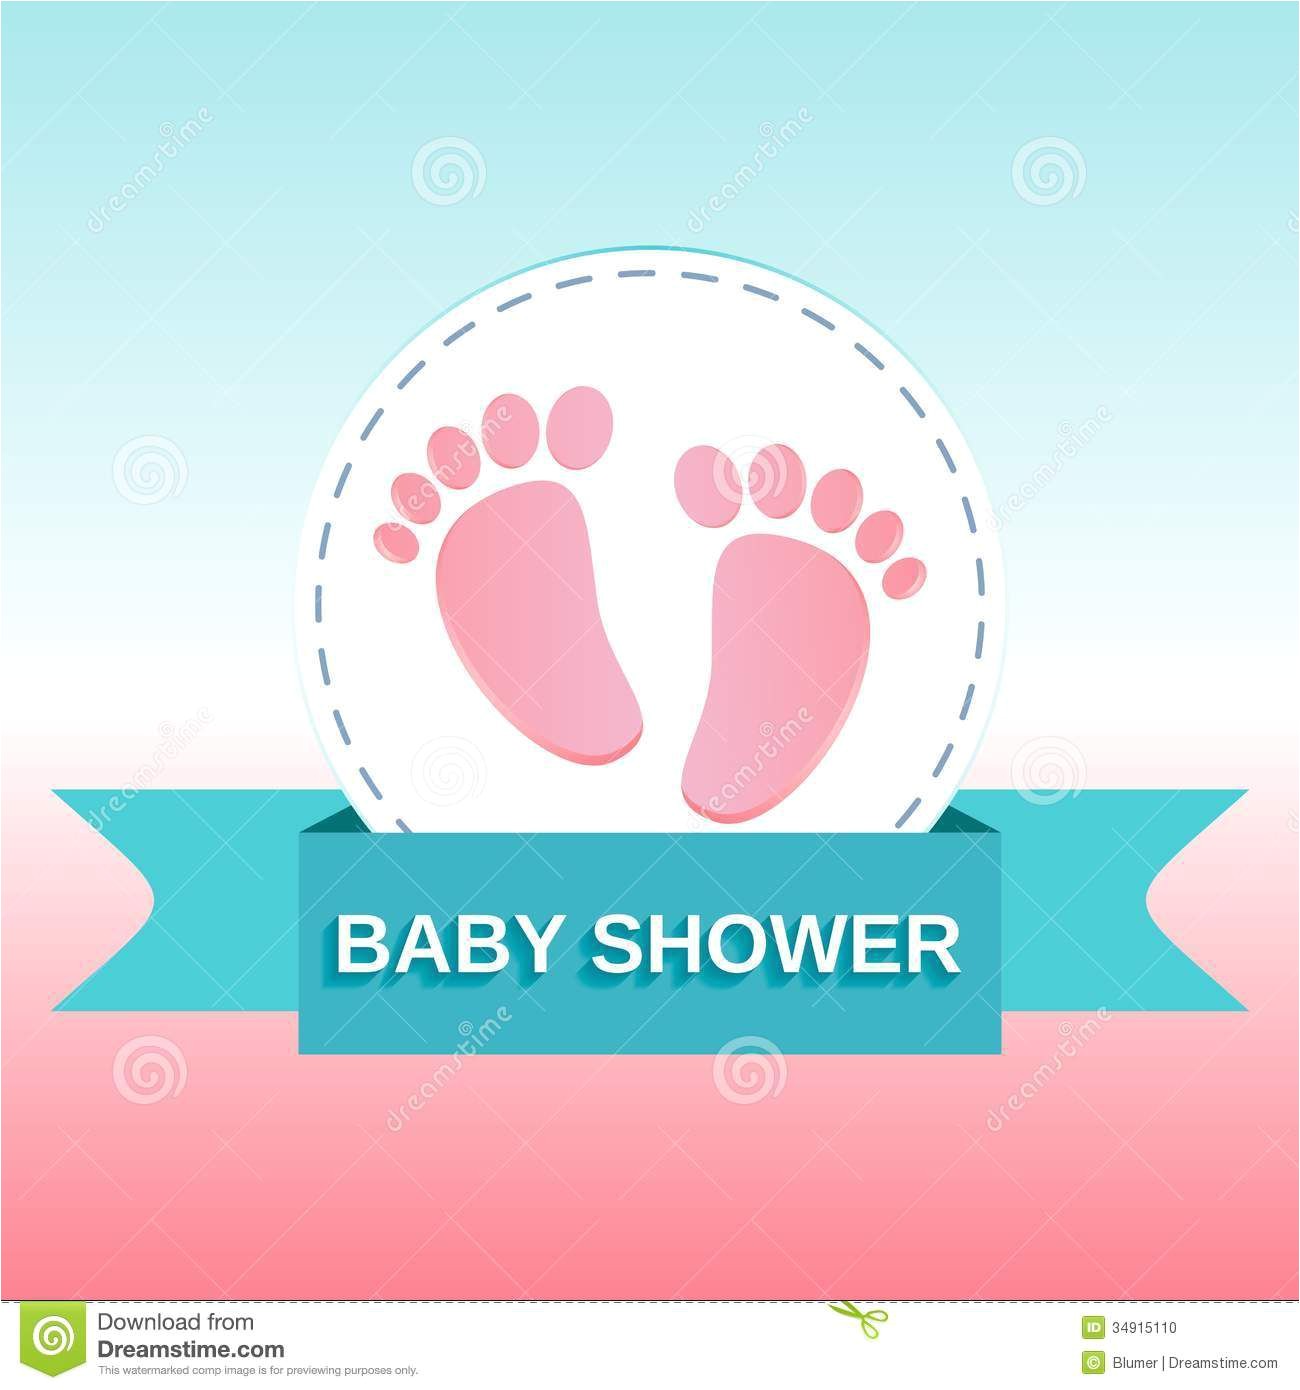 Baby Showers Invitation Cards Baby Shower Invitations Cards Designs Baby Shower